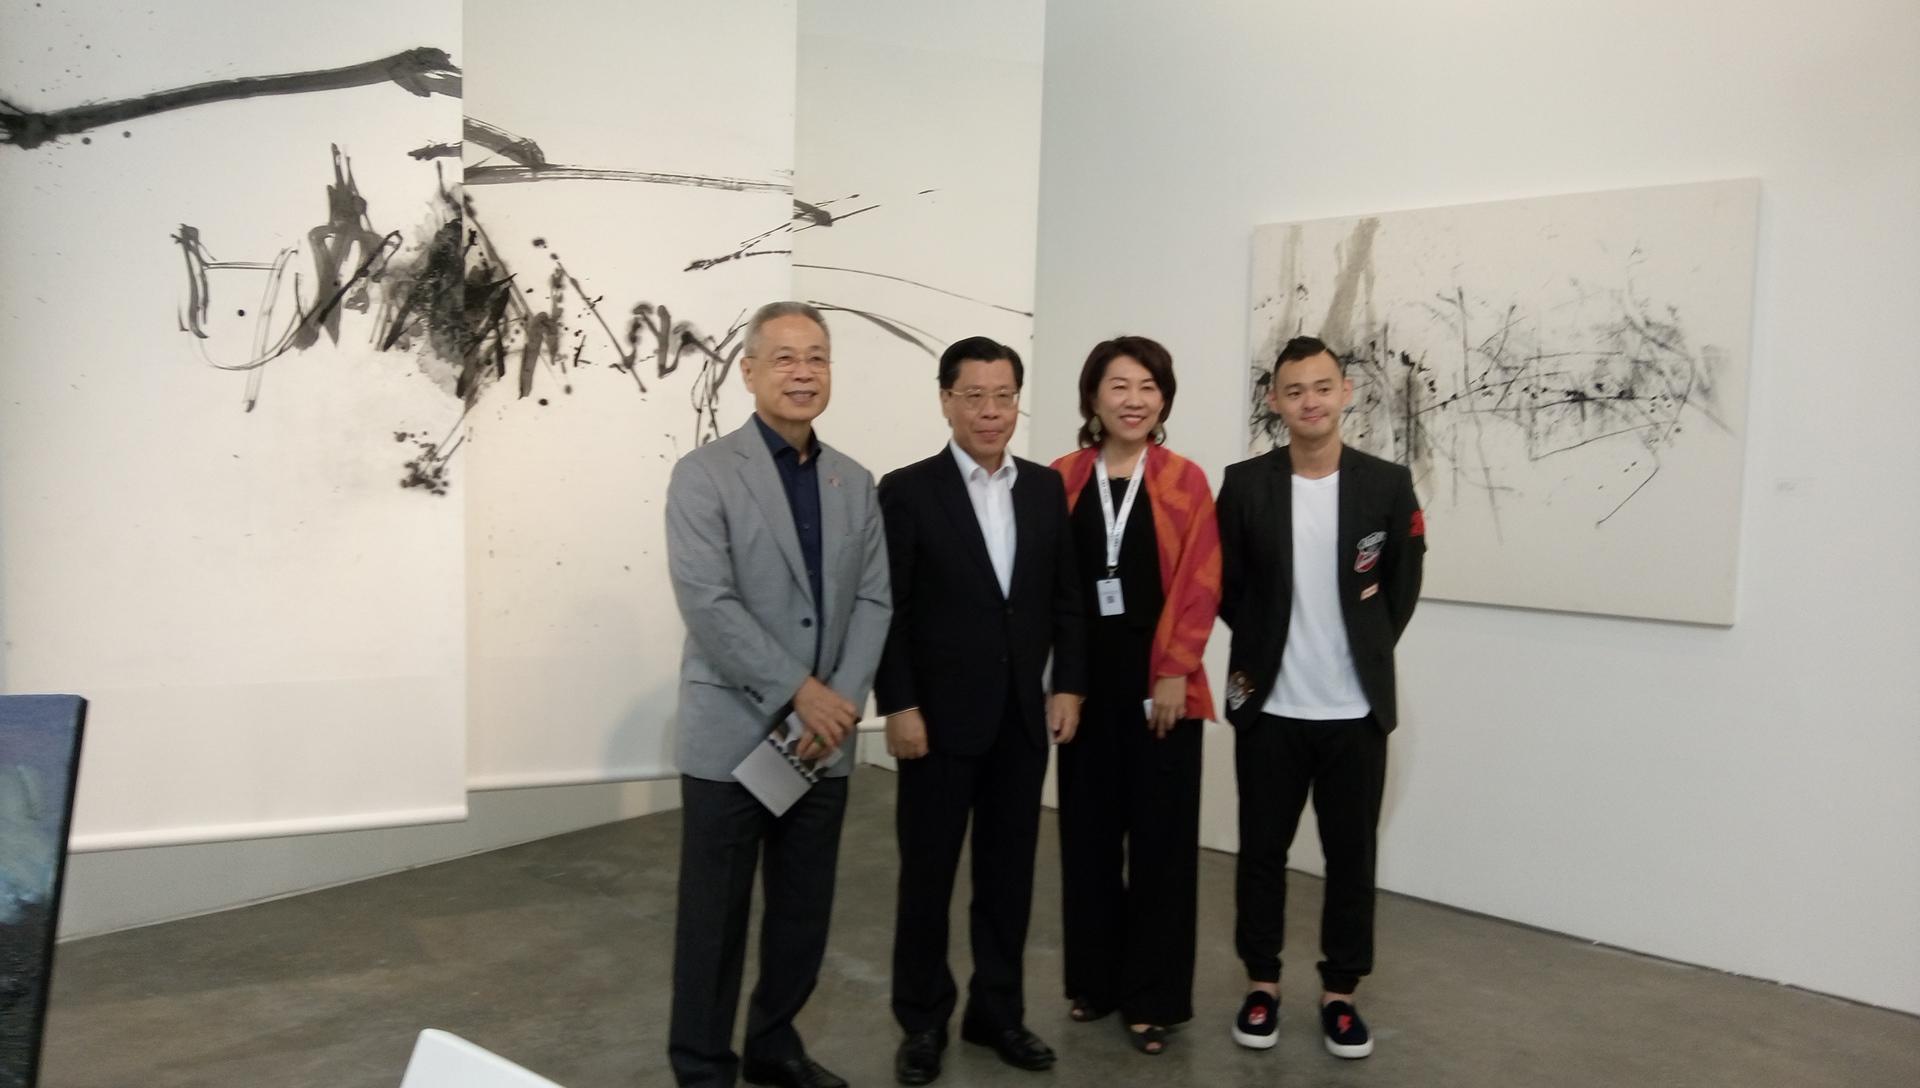 Representative Francis Liang (second from left) and guests being led on a tour of the exhibition by Mr. Marcus Teo, Chief Operating Officer, Art Stage Singapore 2018.